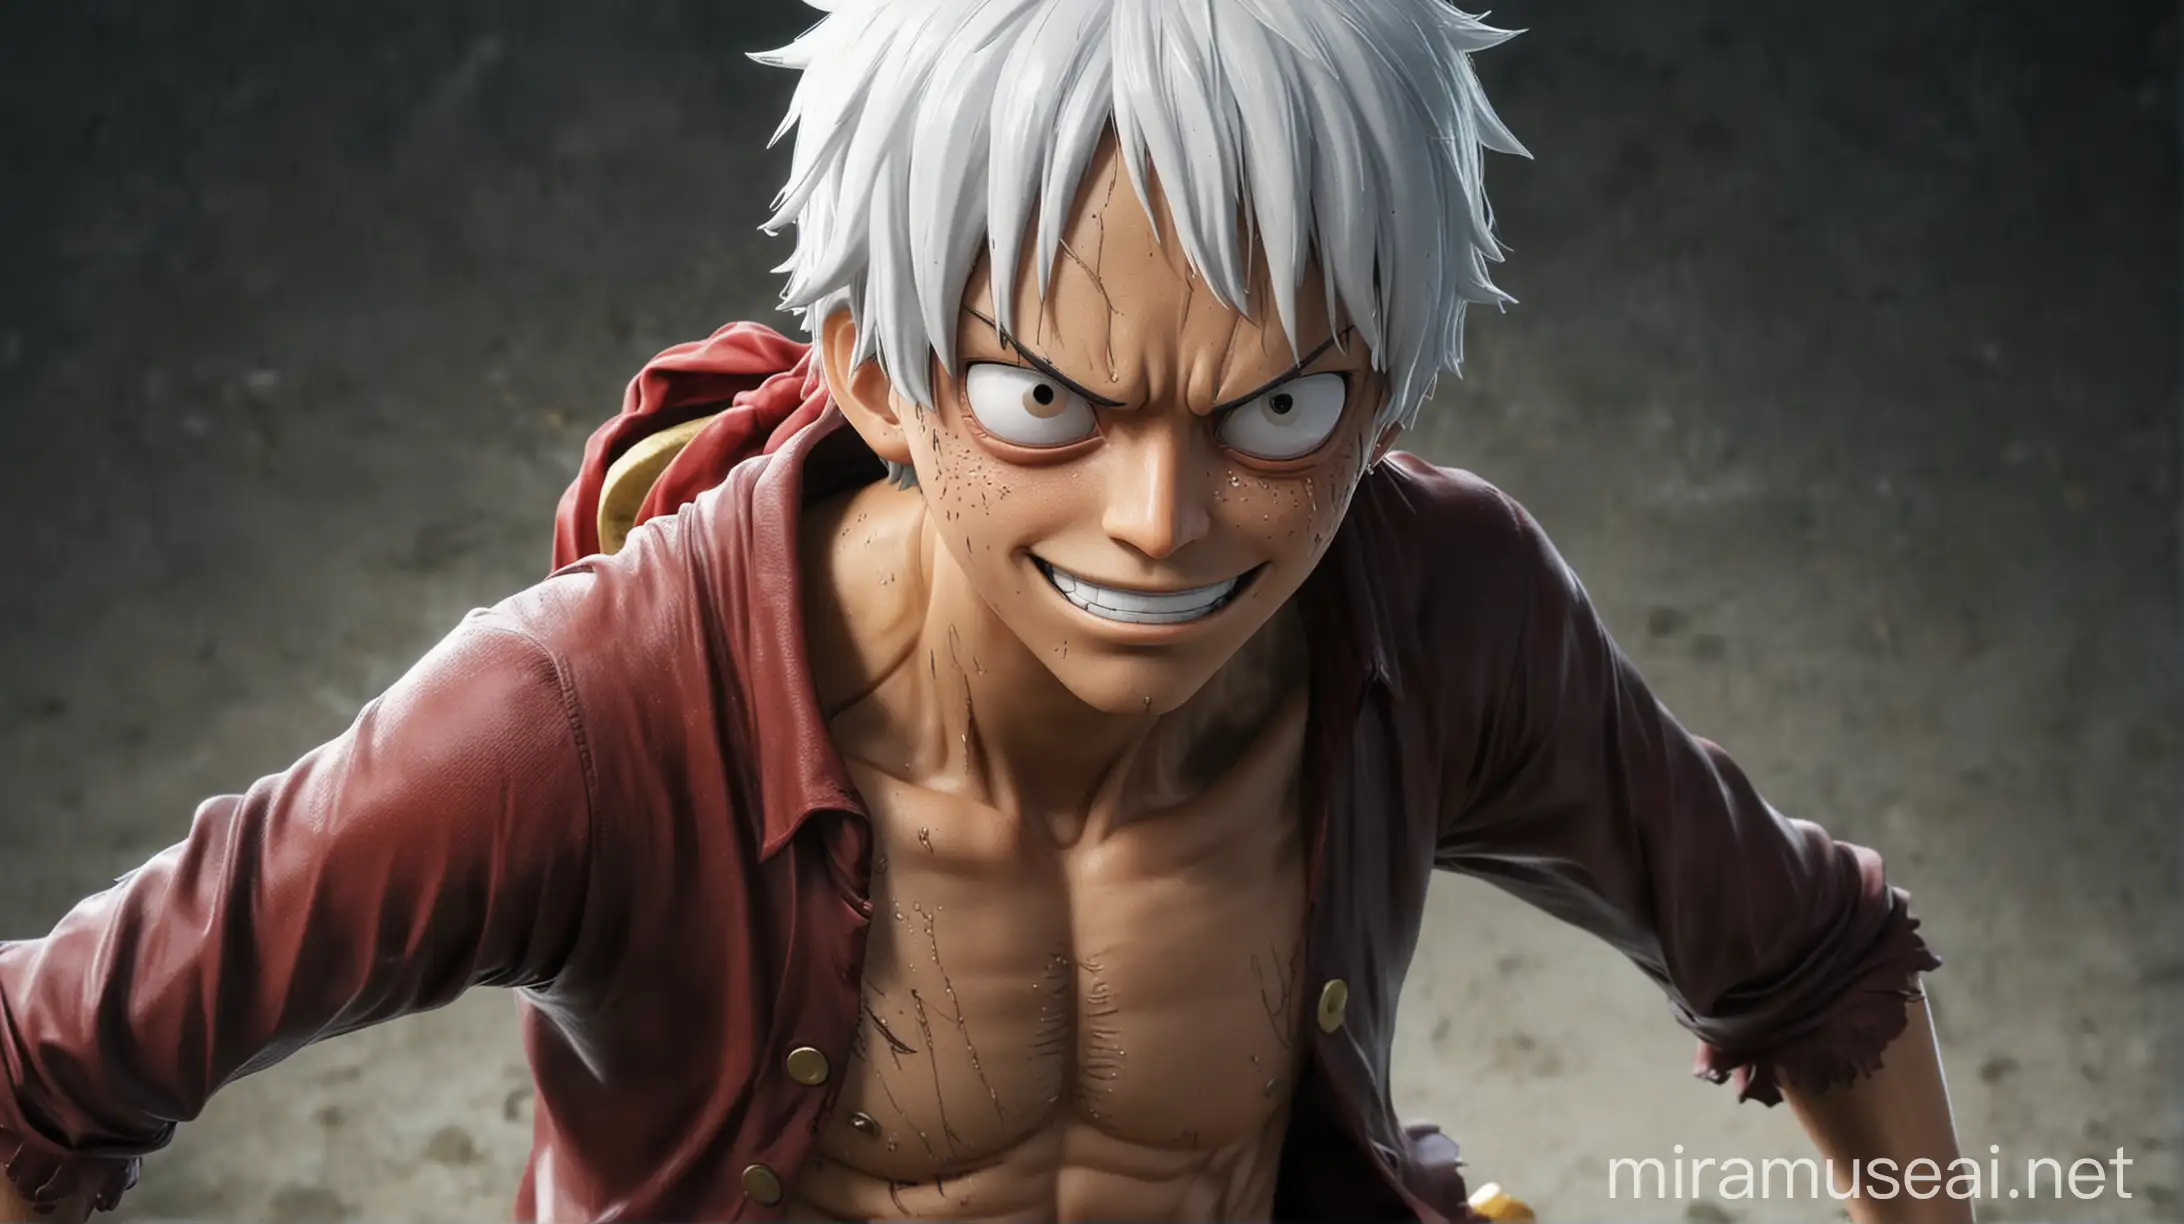 Luffy with white hair, anime one piece show only the head and hair make his body fully visible